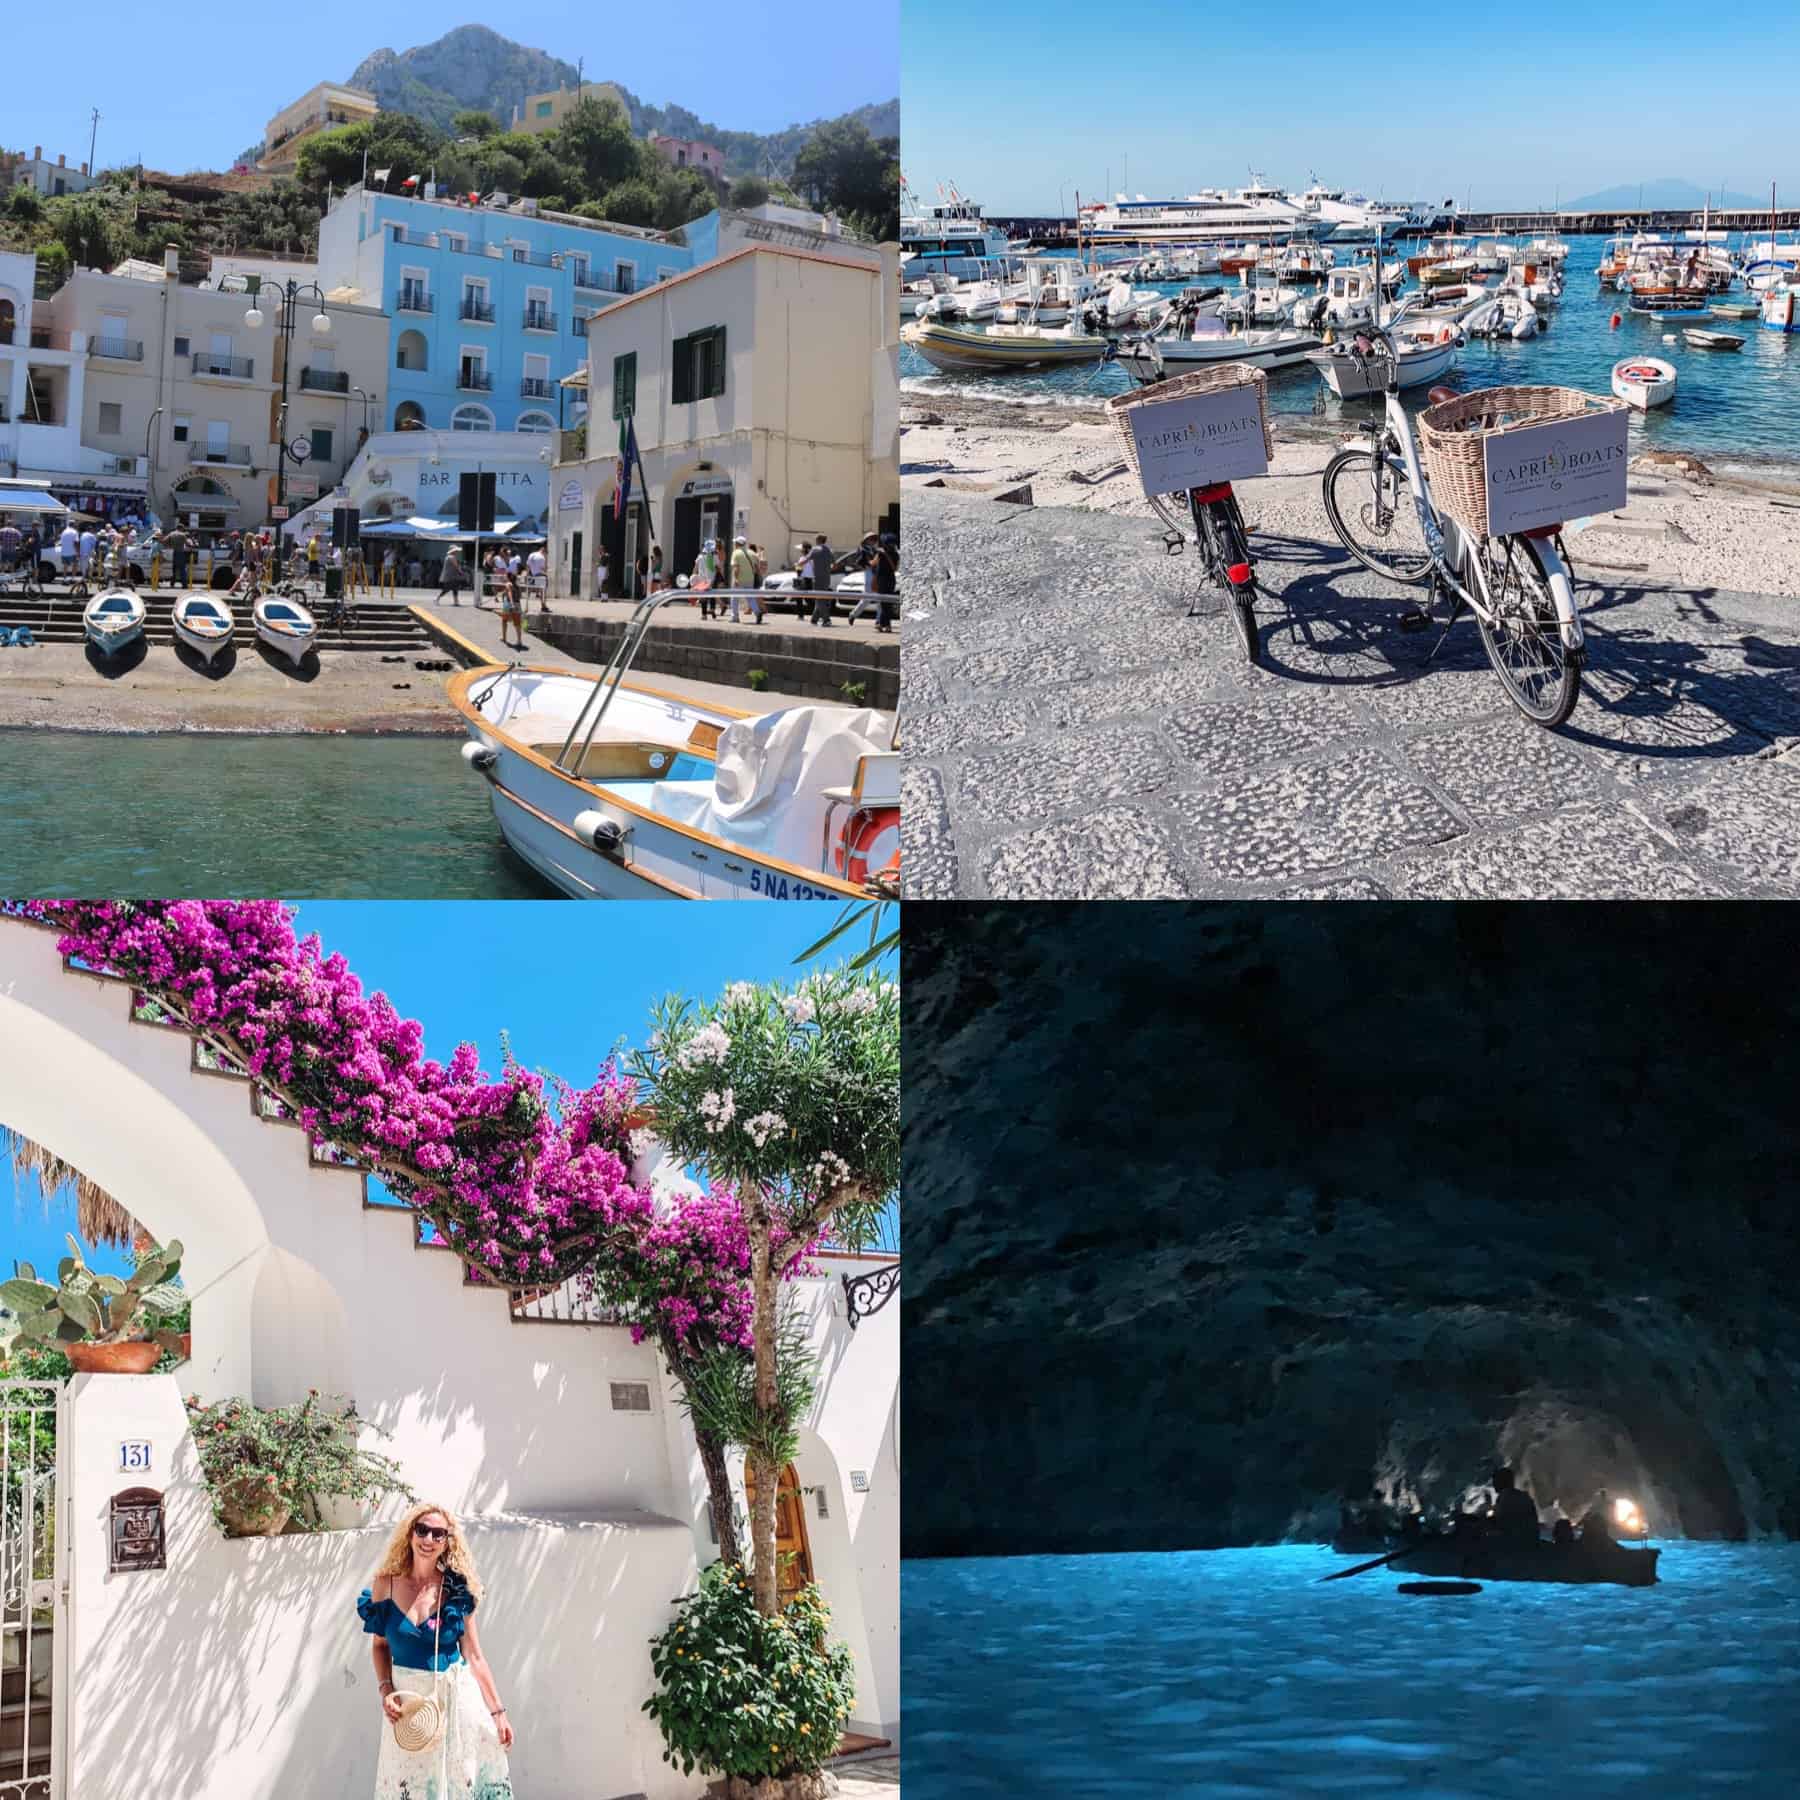 Tips To Enjoy A Day In Capri, The Blue Grotto And Anacapri